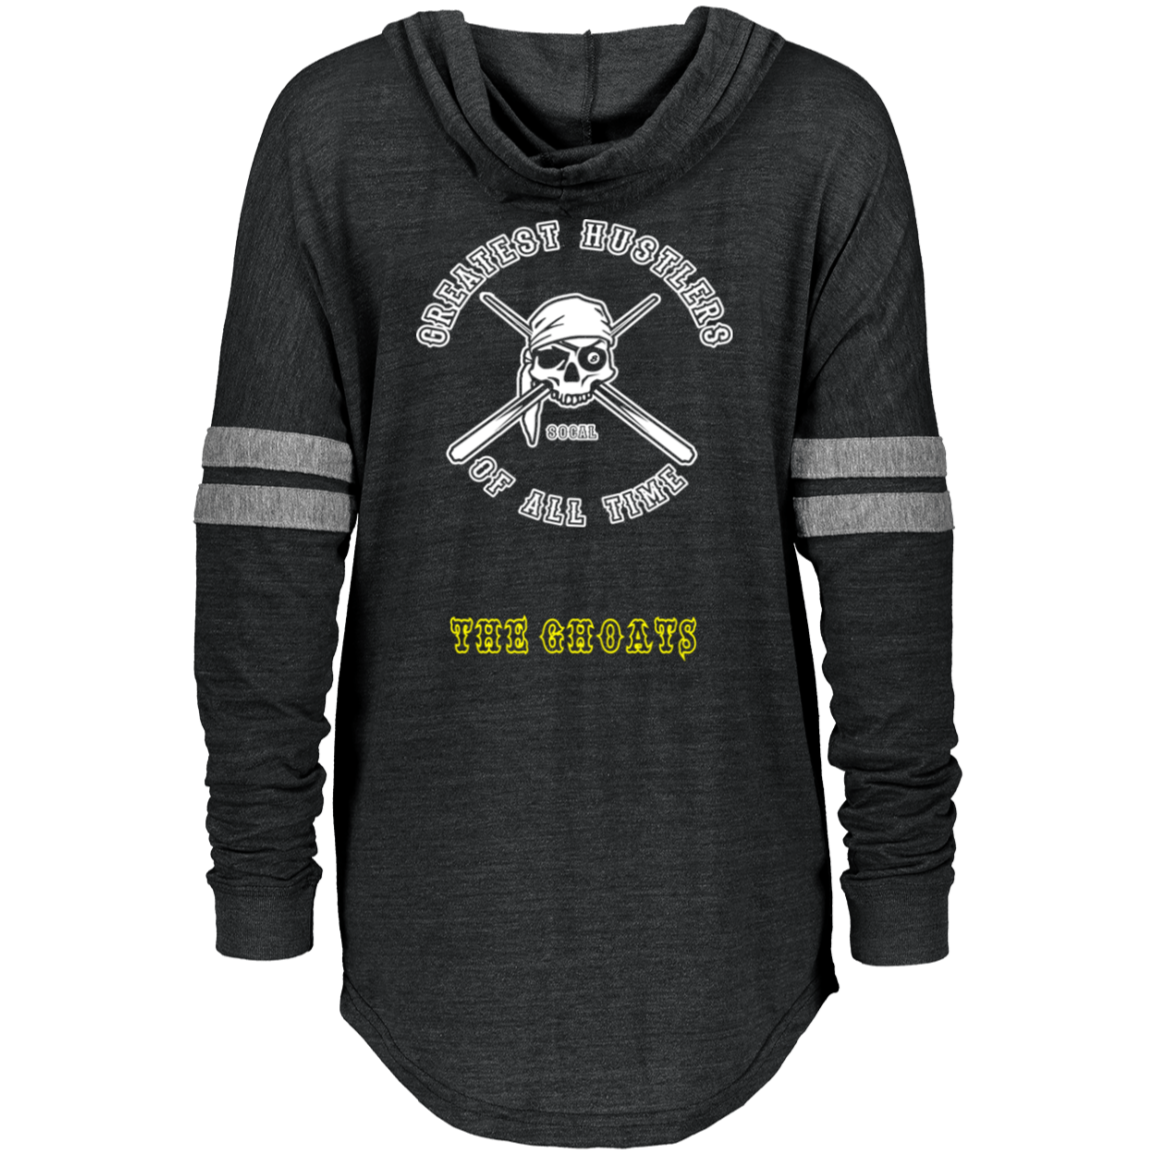 The GHOATS Custom Design. #4 Motorcycle Club Style. Ver 1/2. Ladies Hooded Low Key Pullover